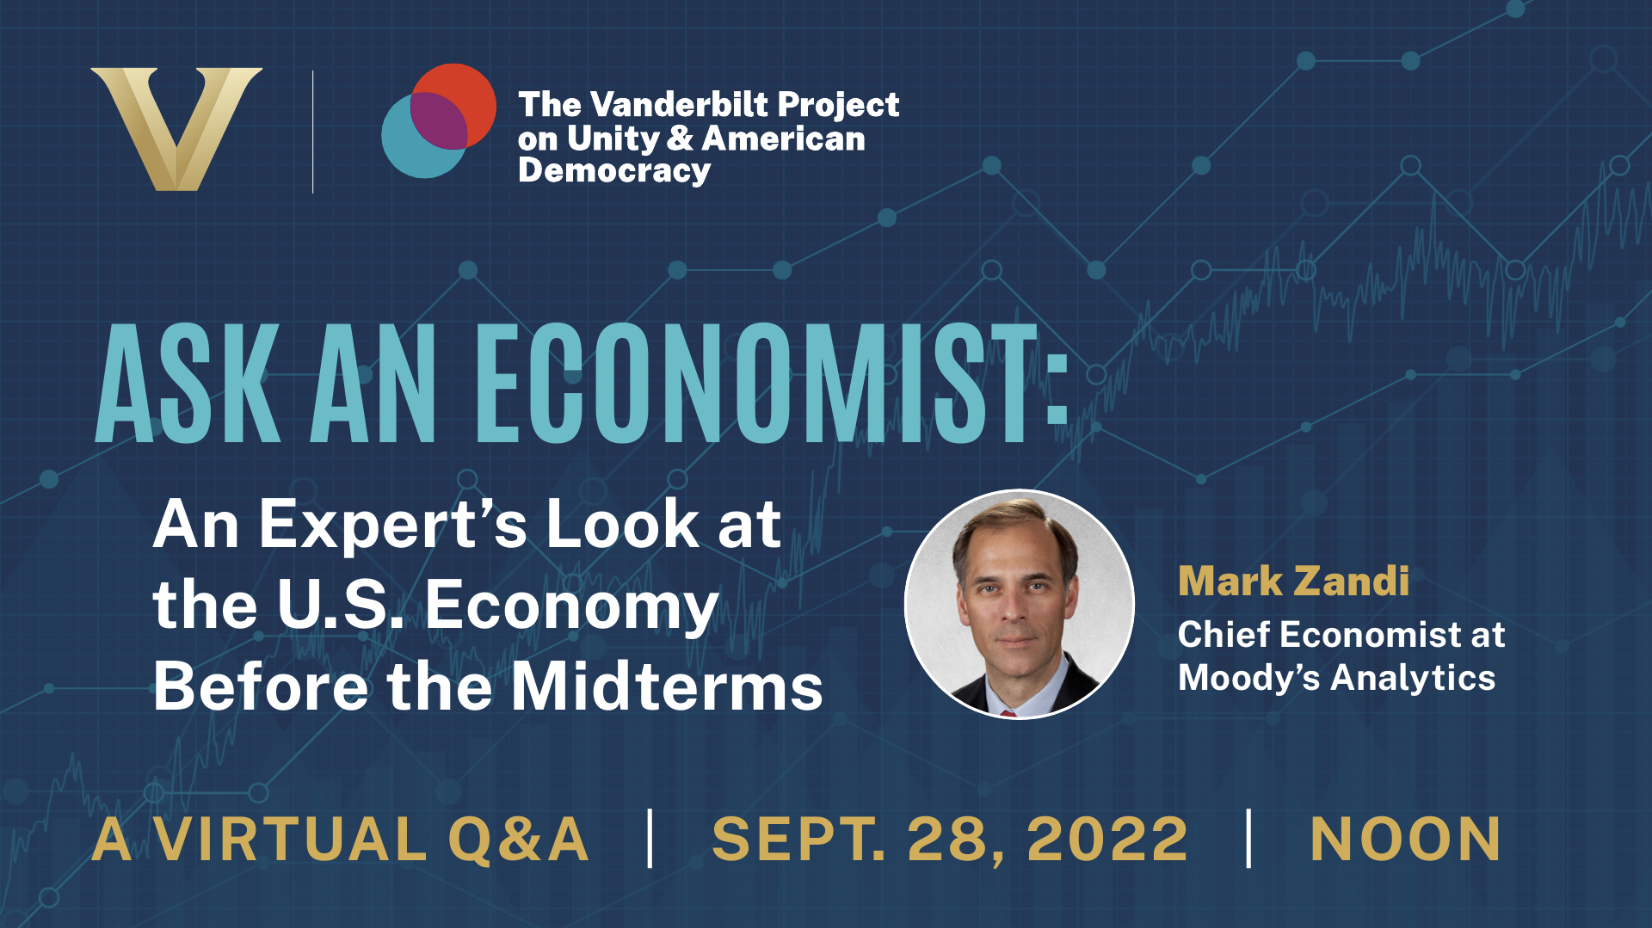 WATCH: Unity Project hosts ‘Ask an Economist’ with Mark Zandi of Moody’s Analytics Sept. 28 at noon